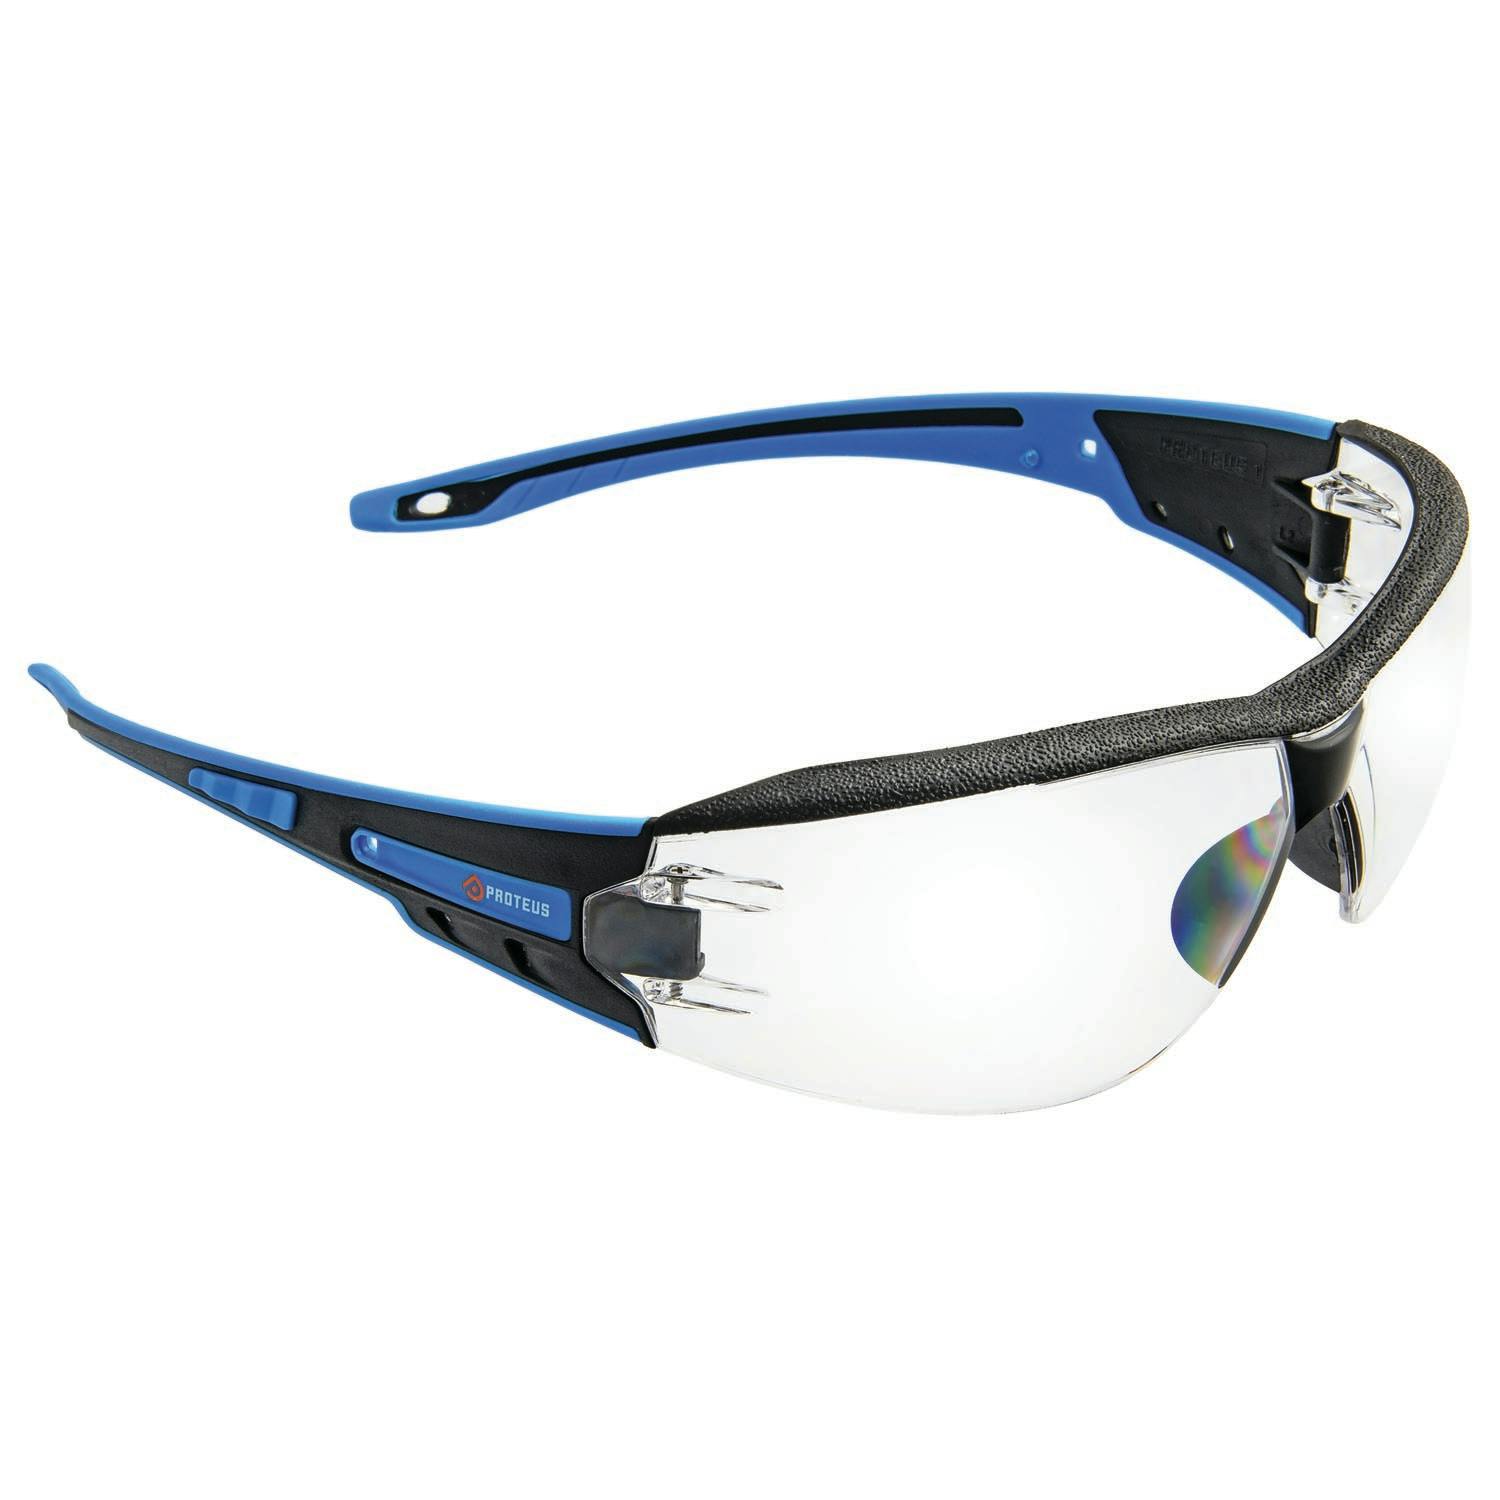 Proteus 1 Safety Glasses Integrated Brow Dust Guard